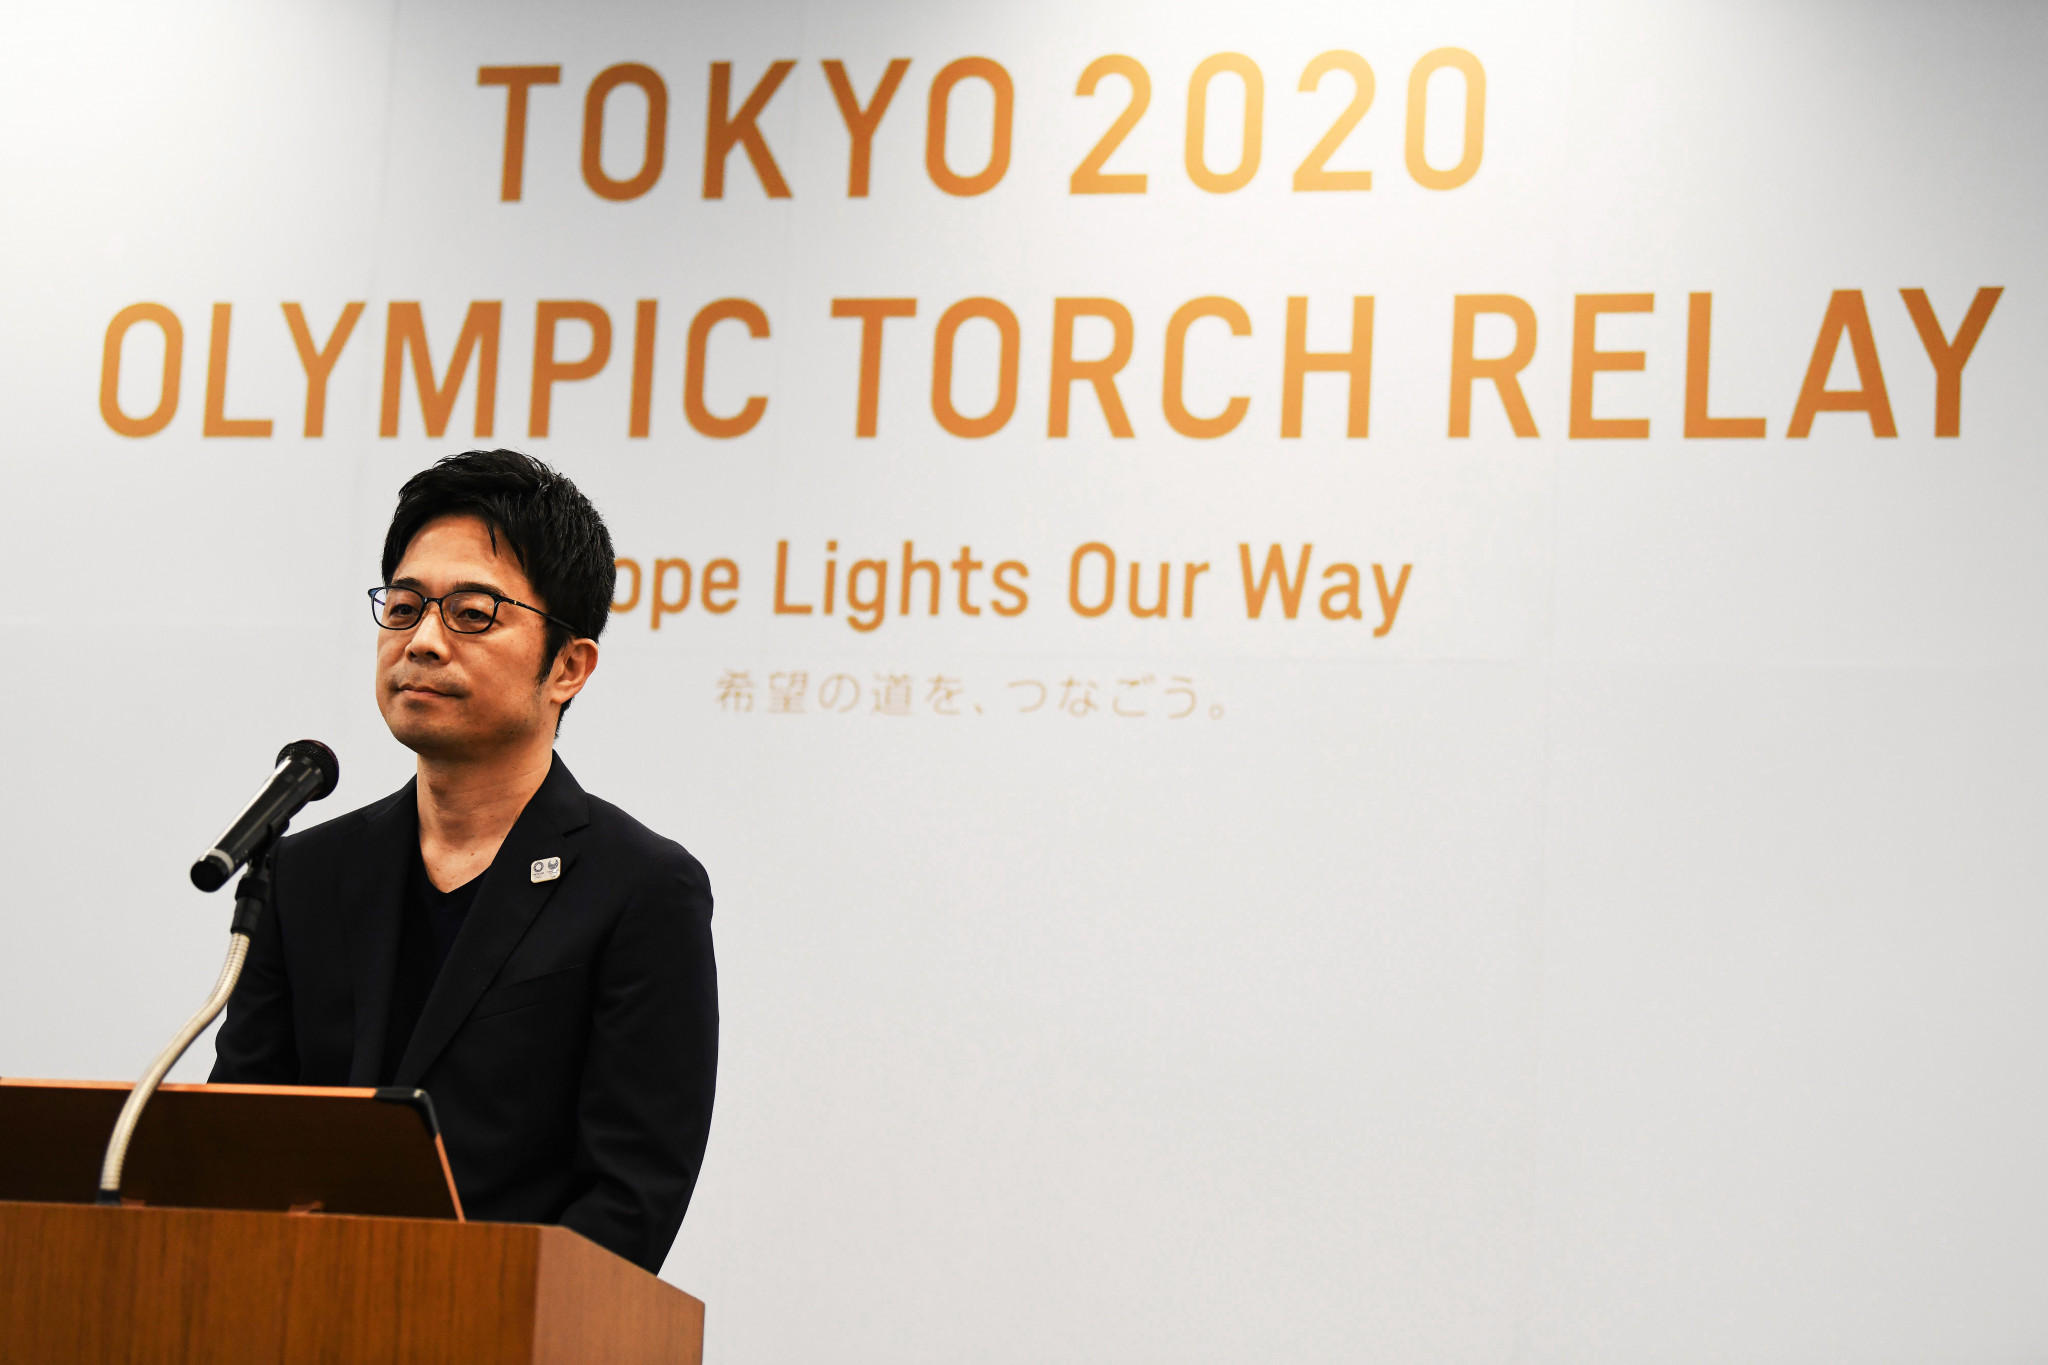 Tokyo 2020 Torch designer creates DIY face visor to help protect health workers